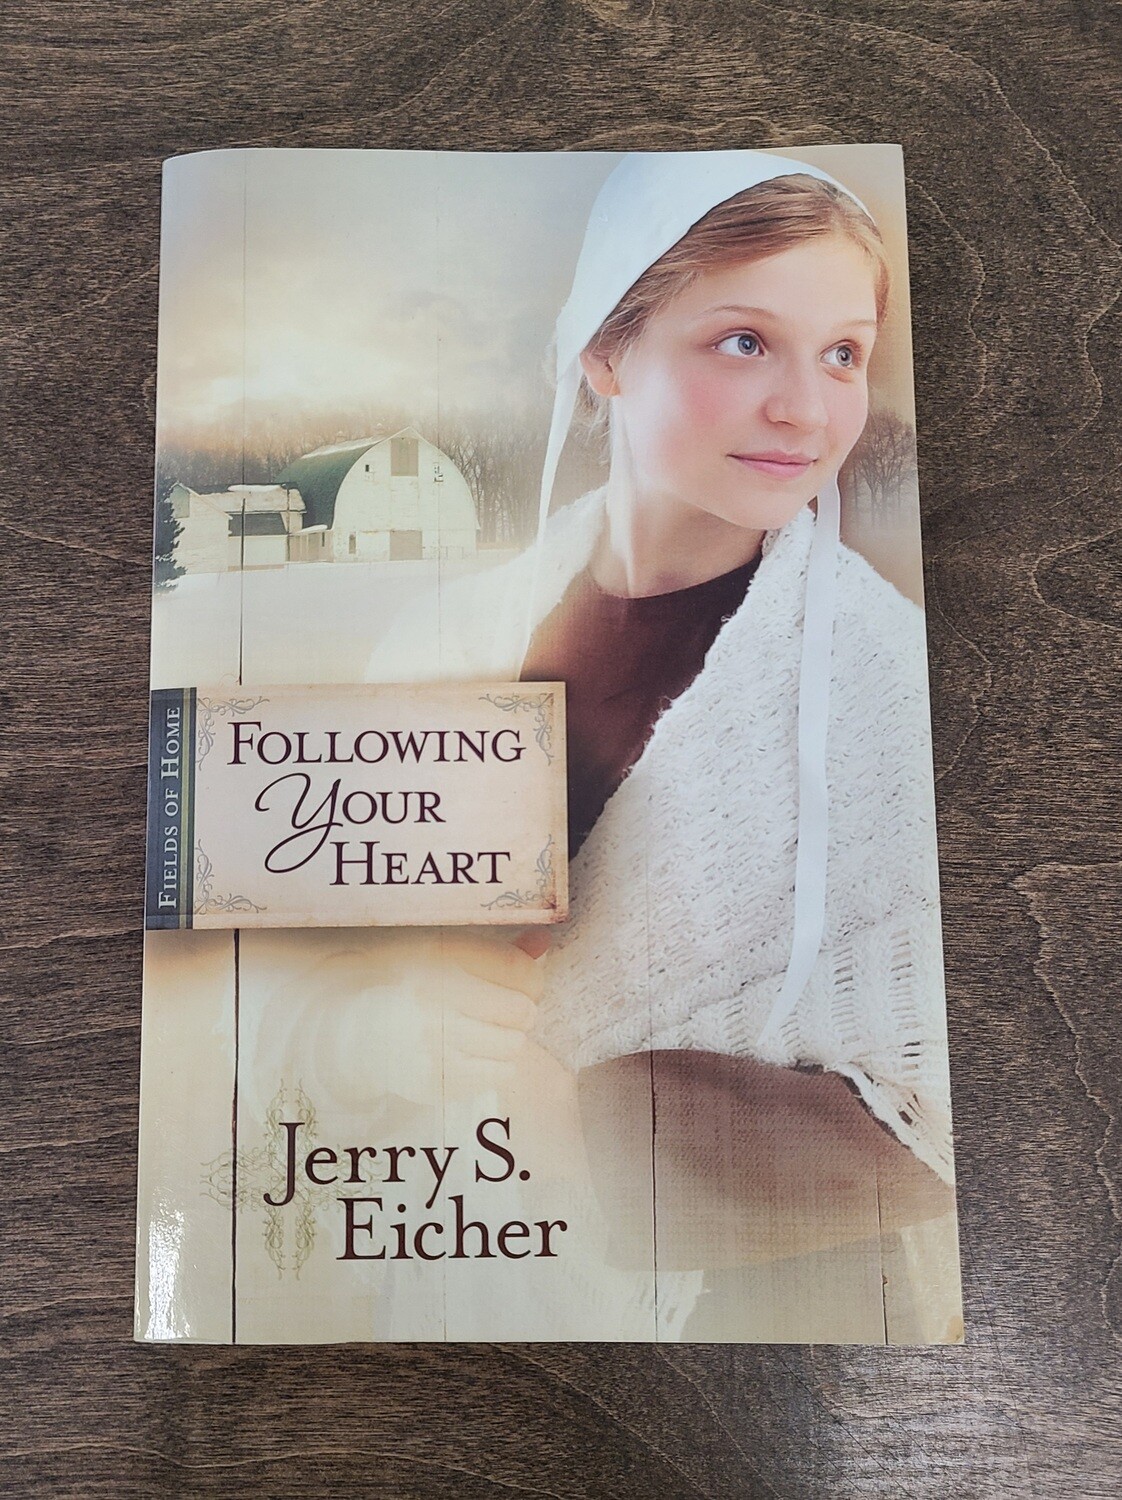 Following Your Heart by Jerry S. Eicher